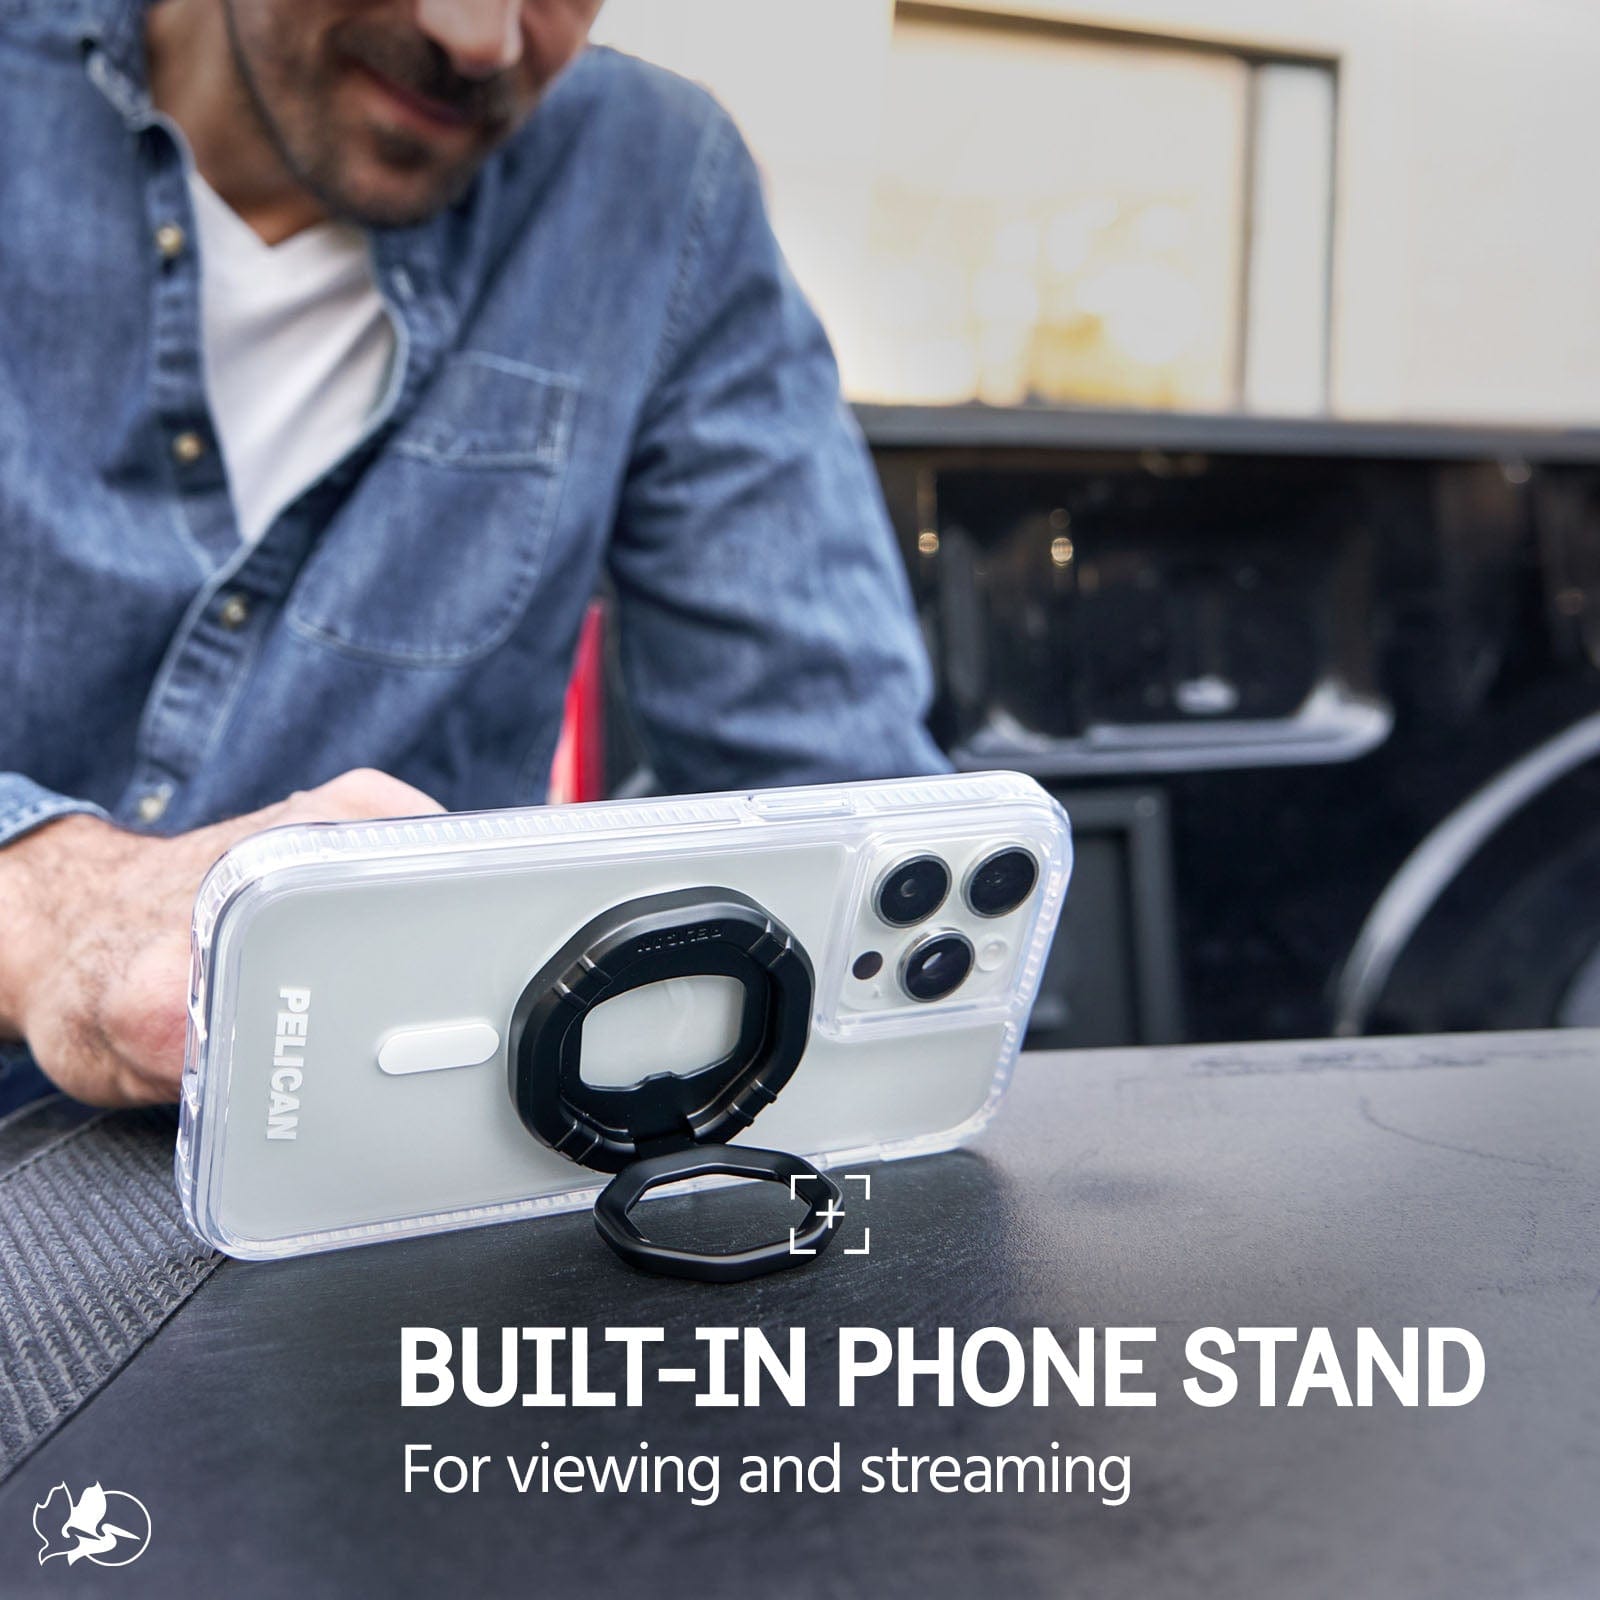 BUILT IN PHONE STAND FOR VIEWING AND STREAMING